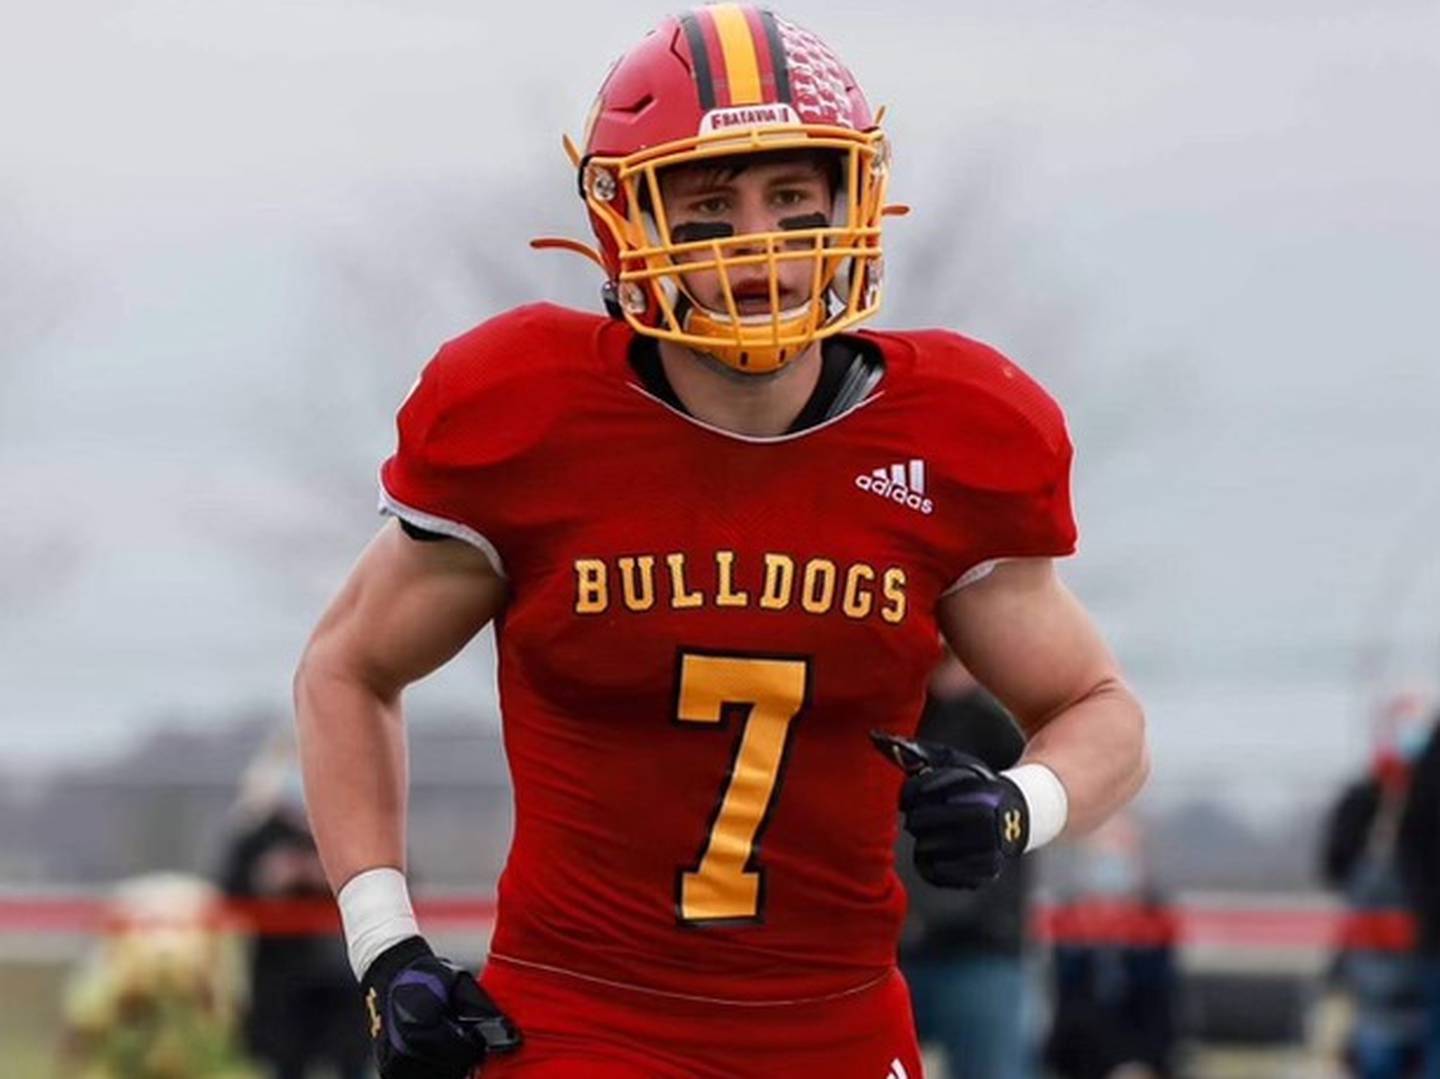 Batavia sophomore Tyler Jansey and the Bulldogs are set to play Geneva this Friday at NIU's Huskie Stadium. Jansey's older brother Michael played on the NIU field in 2017 when Batavia won the Class 7A state championship.